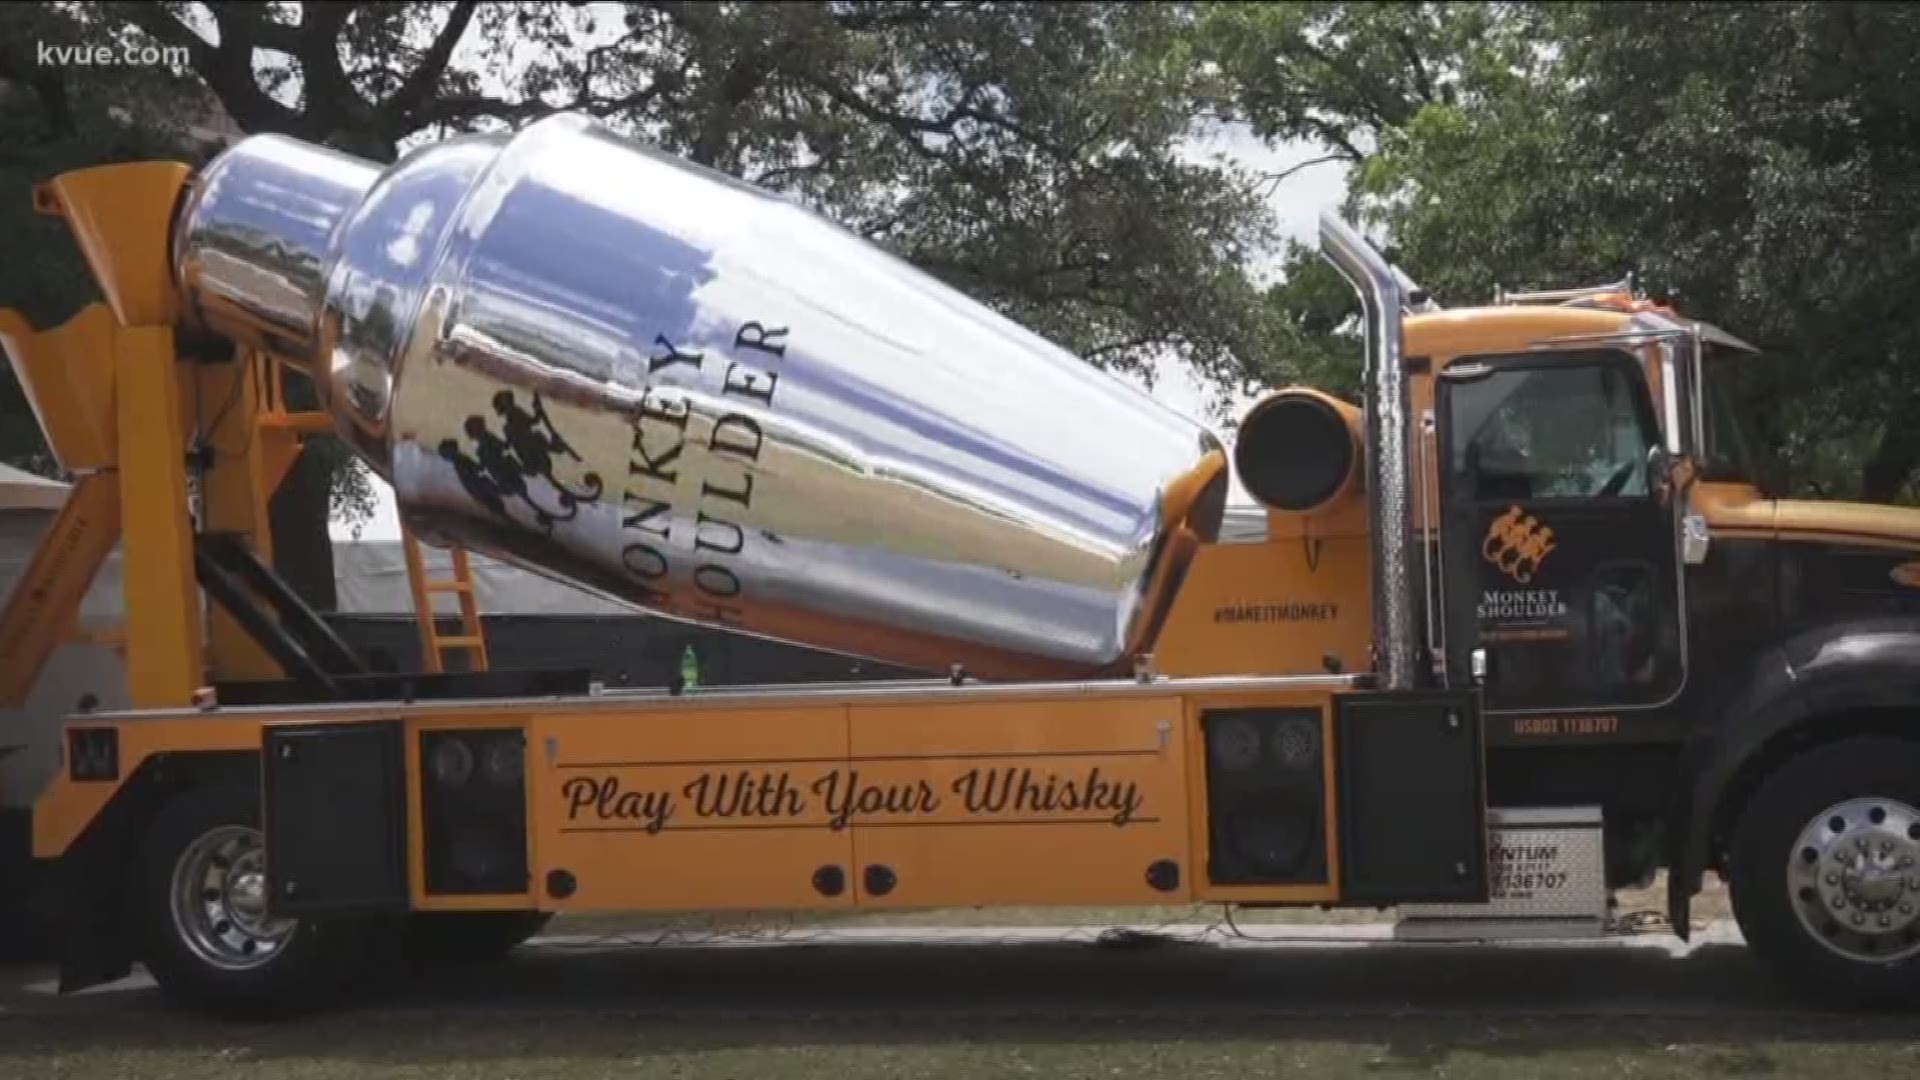 A giant cocktail shaker is making a quick trip around Austin. The Giant Monkey Mixer is currently at the Wine and Food Festival. It can hold more than 2,000 gallons of alcohol.